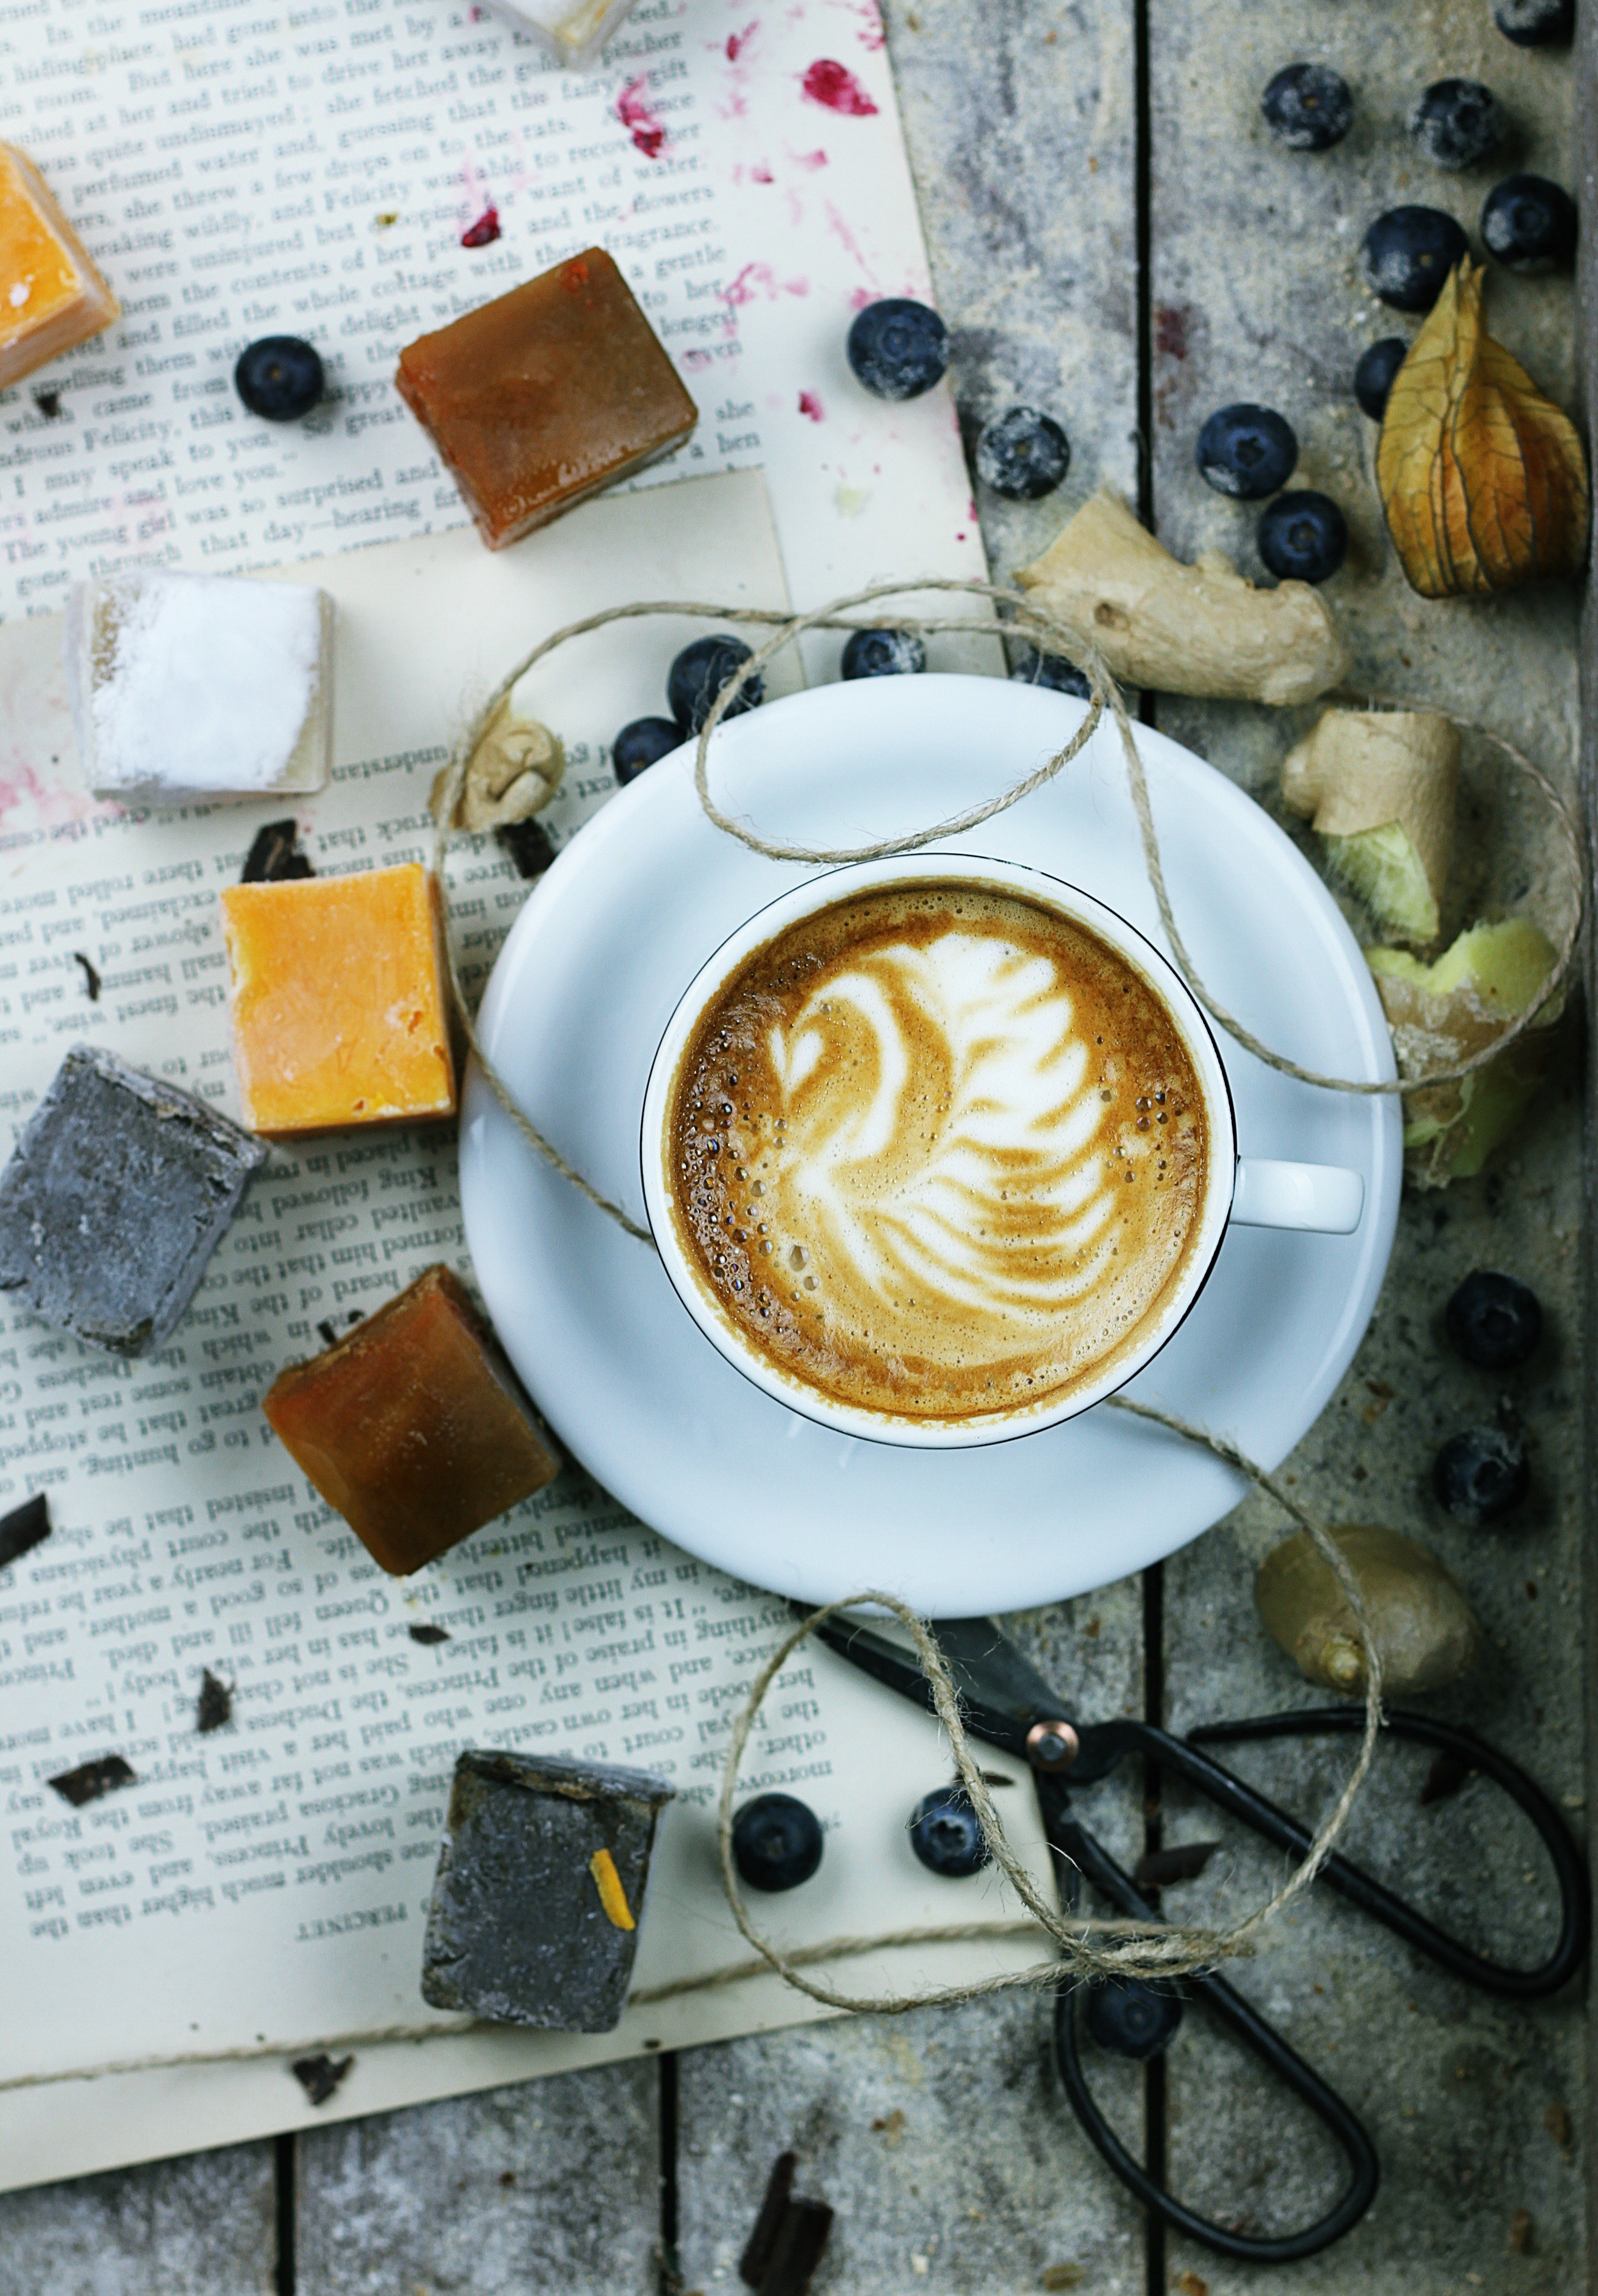 water, Coffee, Cappuccino, Scissors, Wooden surface, Chinese lantern, Fruit, Food, Cup Wallpaper